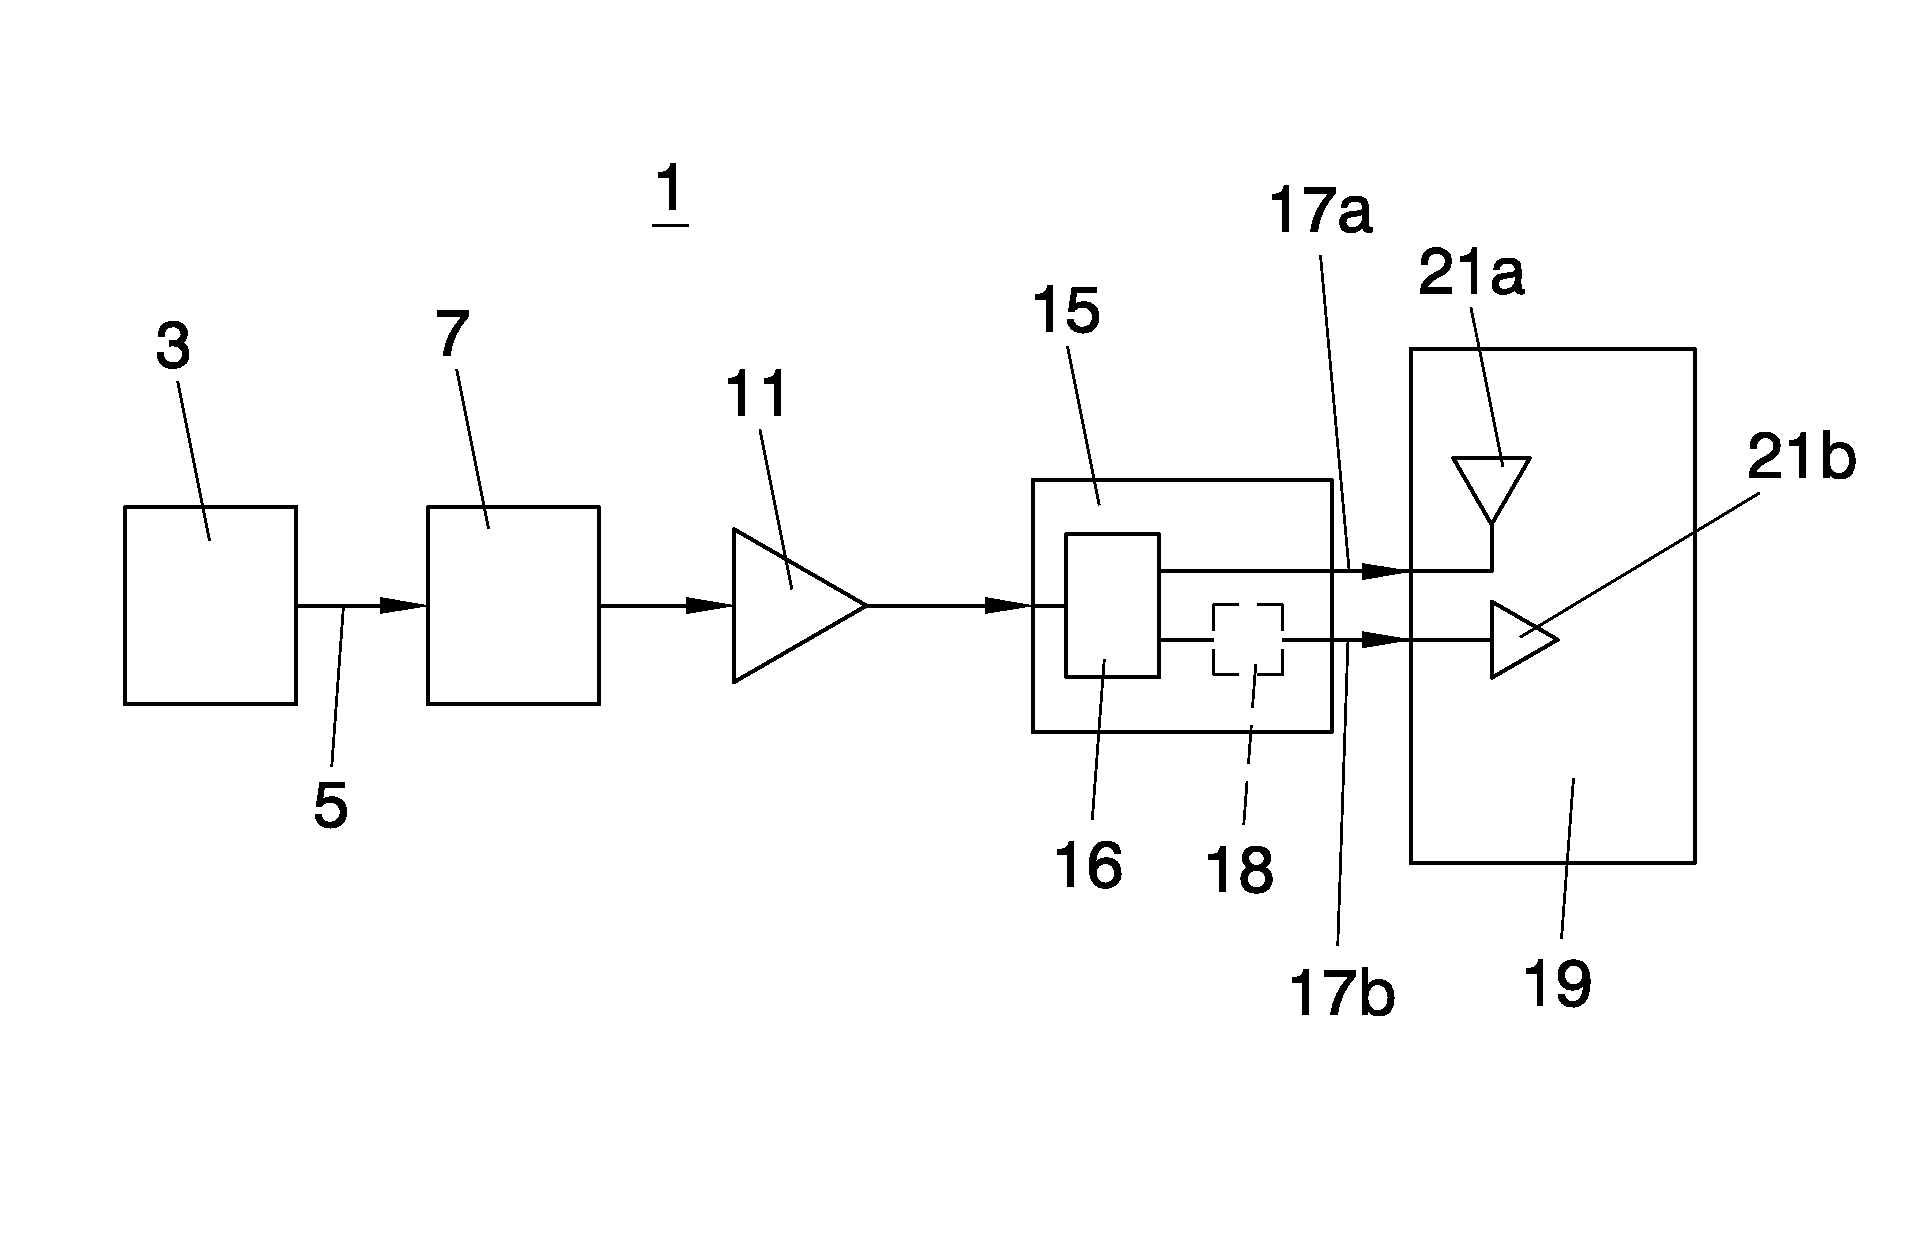 Transmitting a radio signal in a mobile communication network